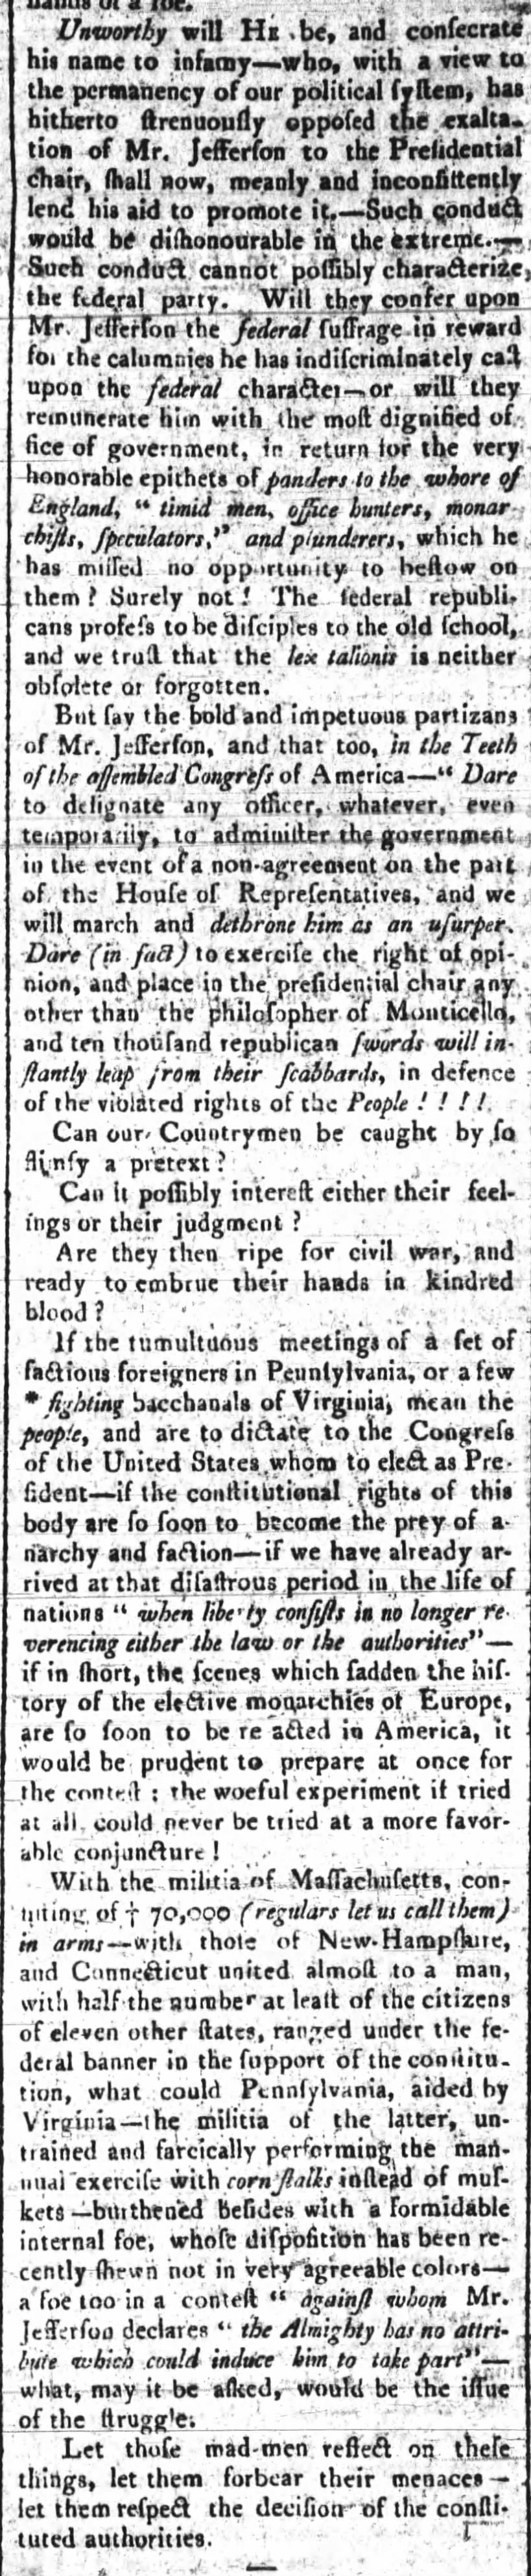 Article from a Federalist paper critical of Federalists in Congress willing to support Jefferson